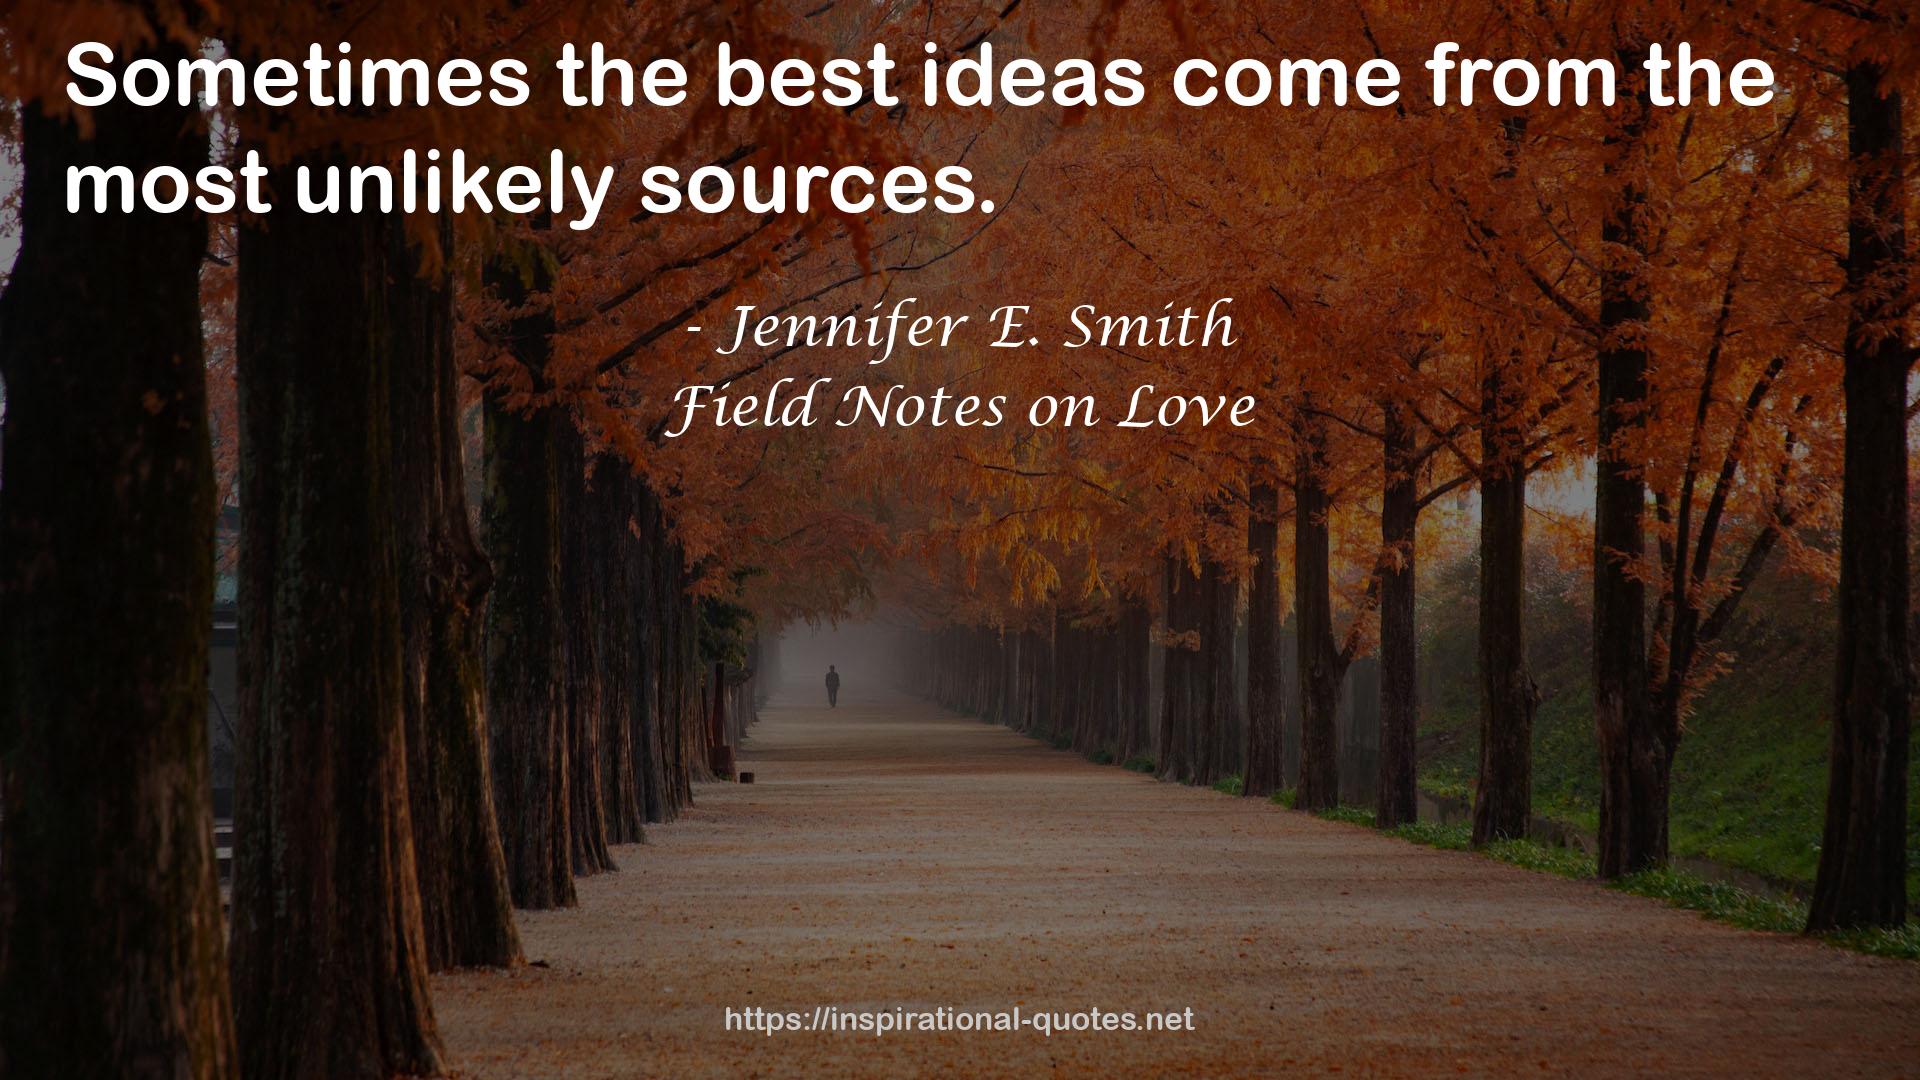 Field Notes on Love QUOTES